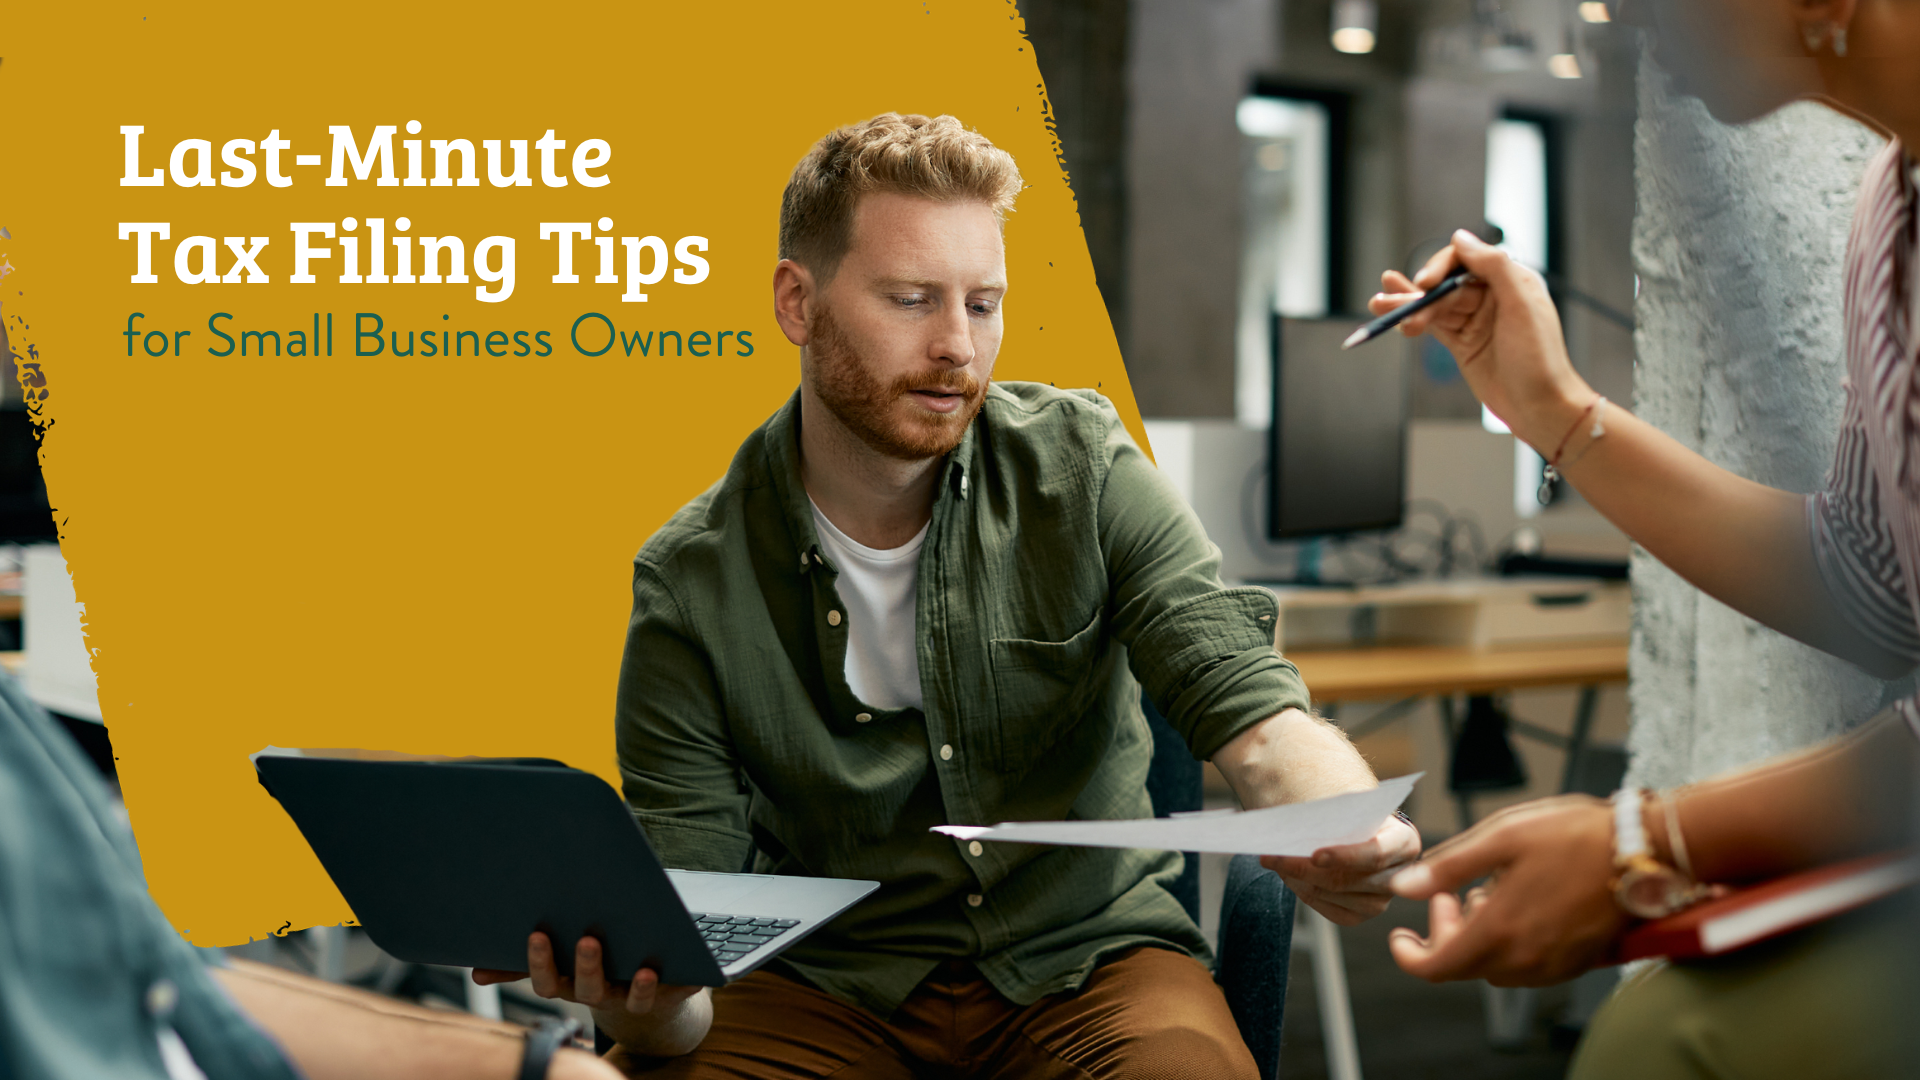 Last-Minute Tax Filing Tips for Small Business Owners